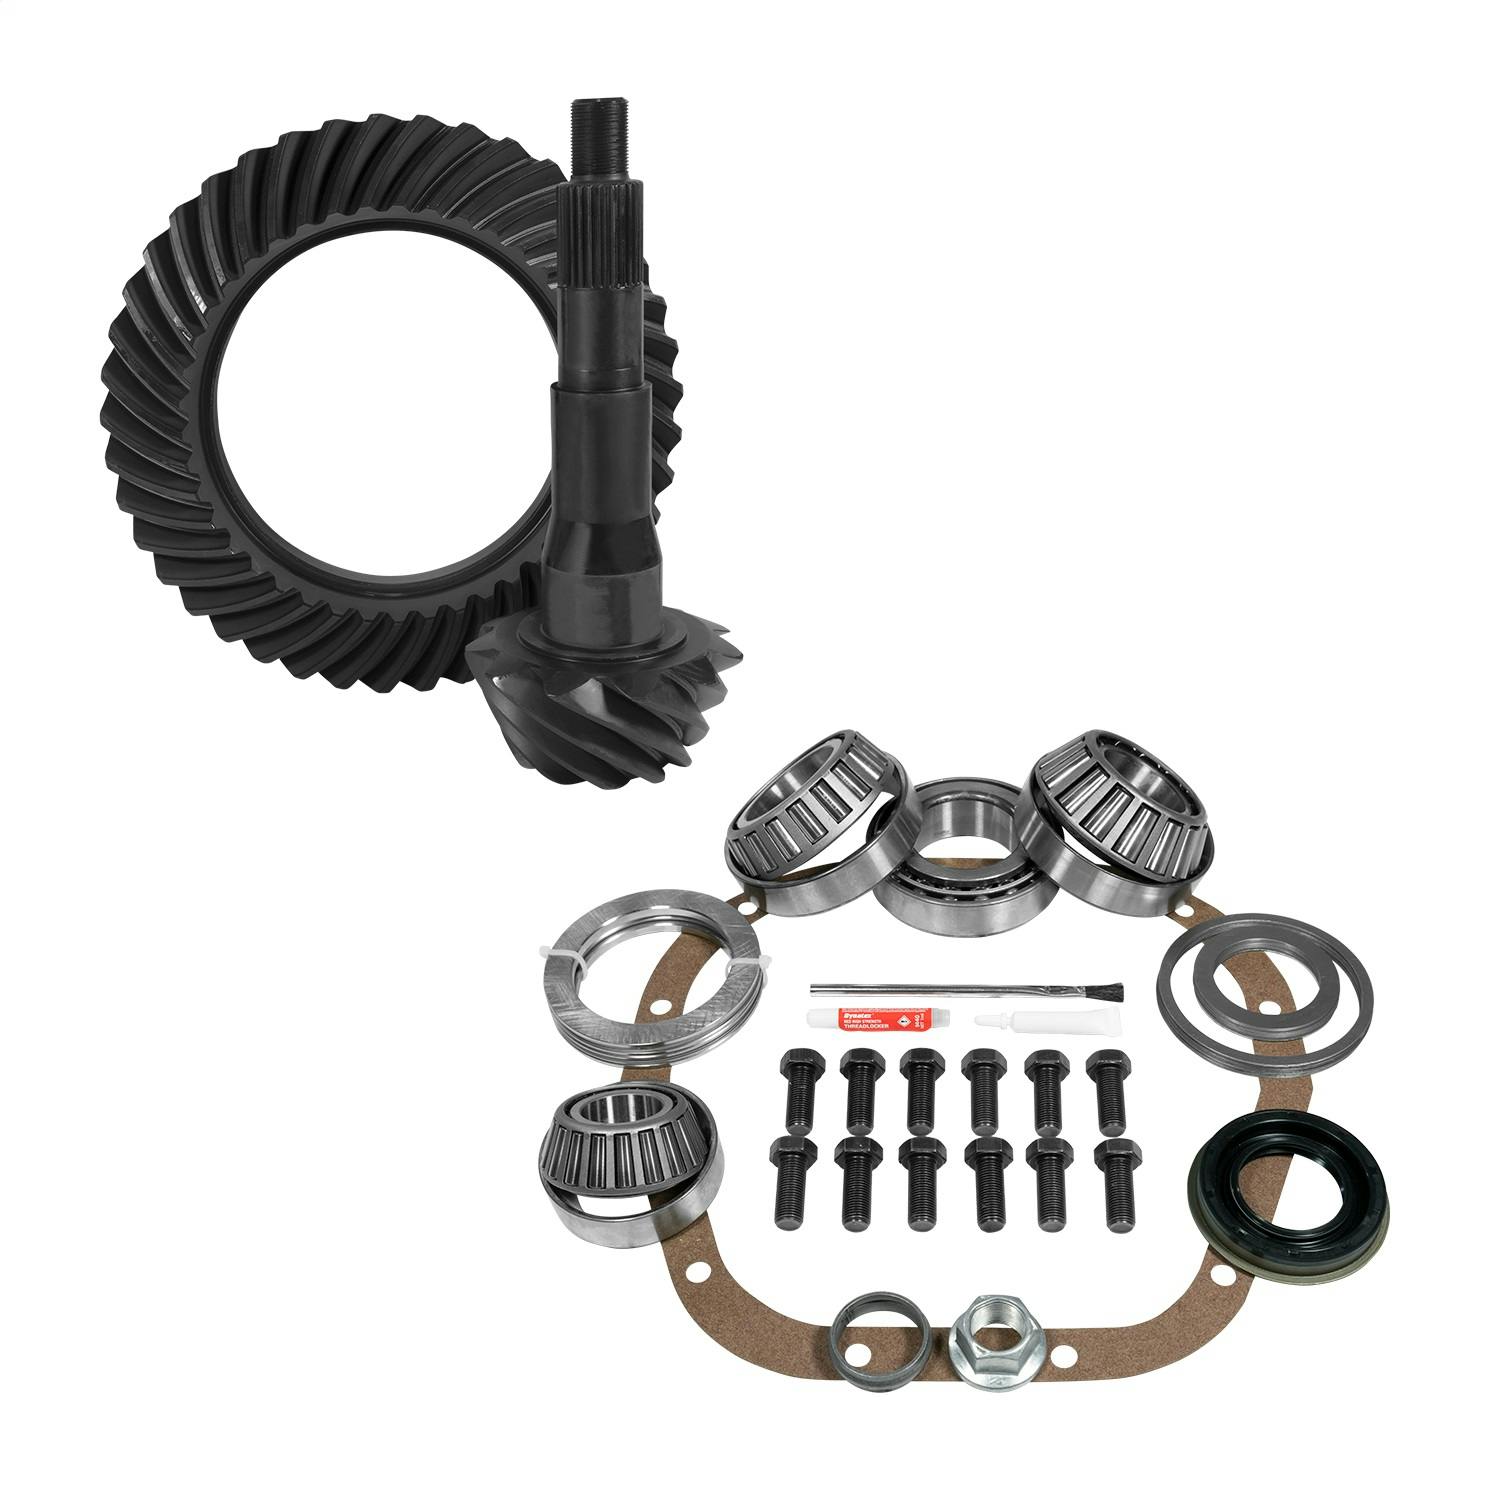 USA Standard Gear ZGK2136 10.5in. Ford 4.11 Rear Ring/Pinion and Install Kit